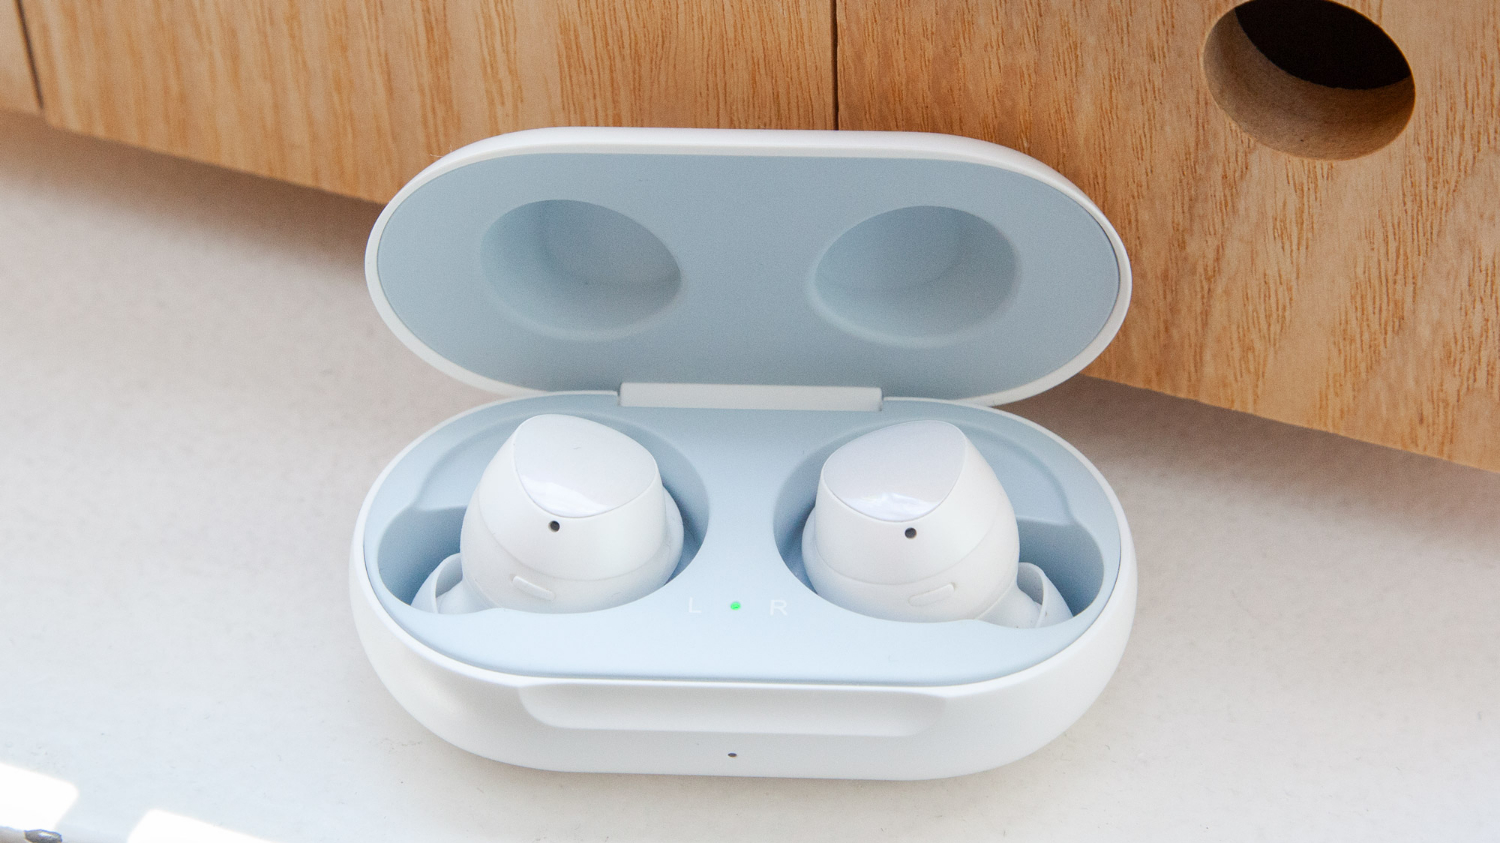 Samsung Galaxy Buds Review: The New Wireless Earbuds to Beat | Tom's Guide